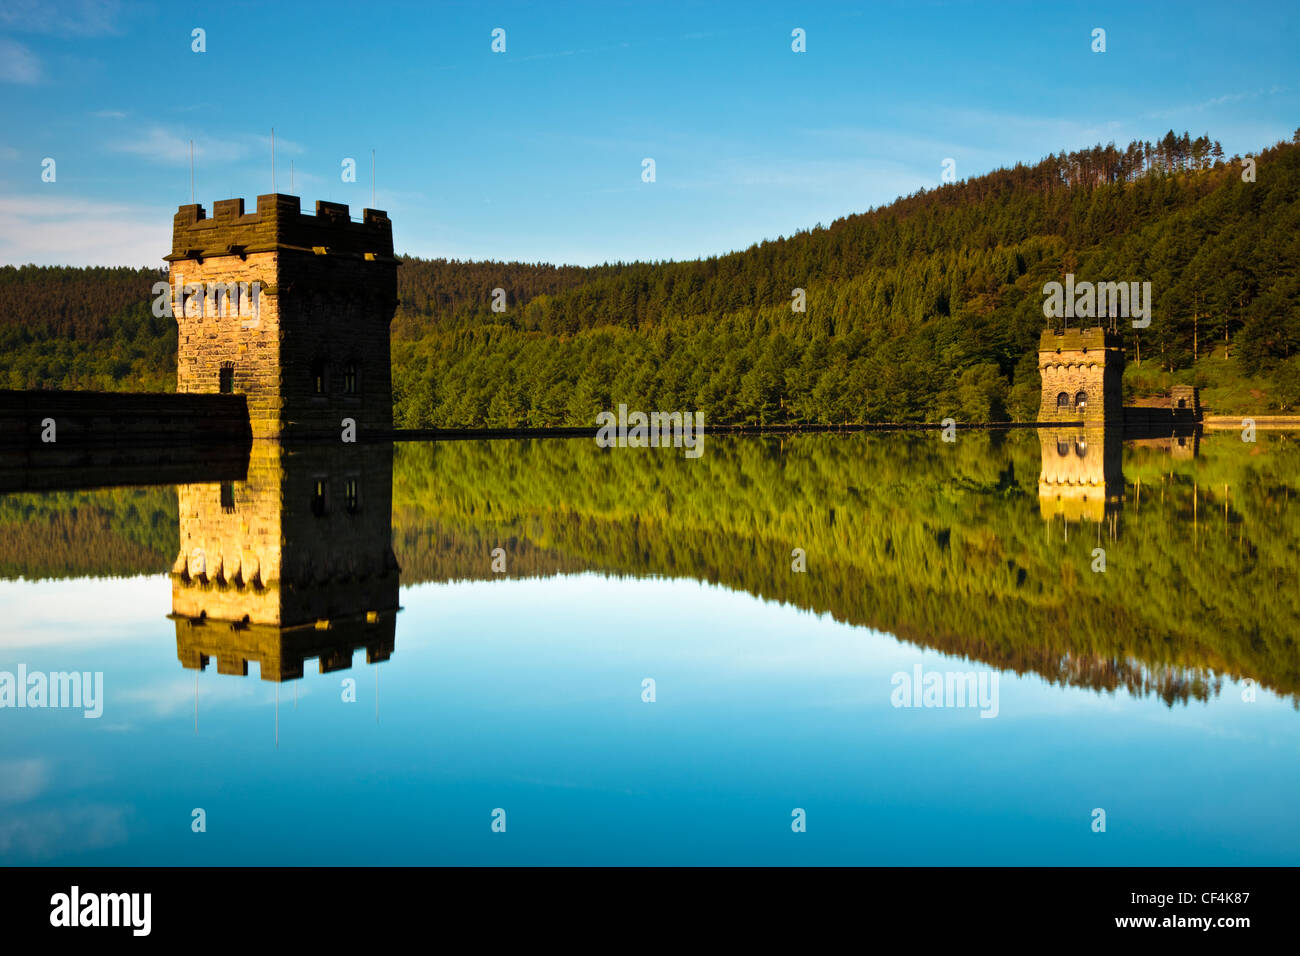 Reflection of Derwent Dam in the calm waters of the Derwent reservoir on a spring morning. The Derwent reservoir was used by the Stock Photo